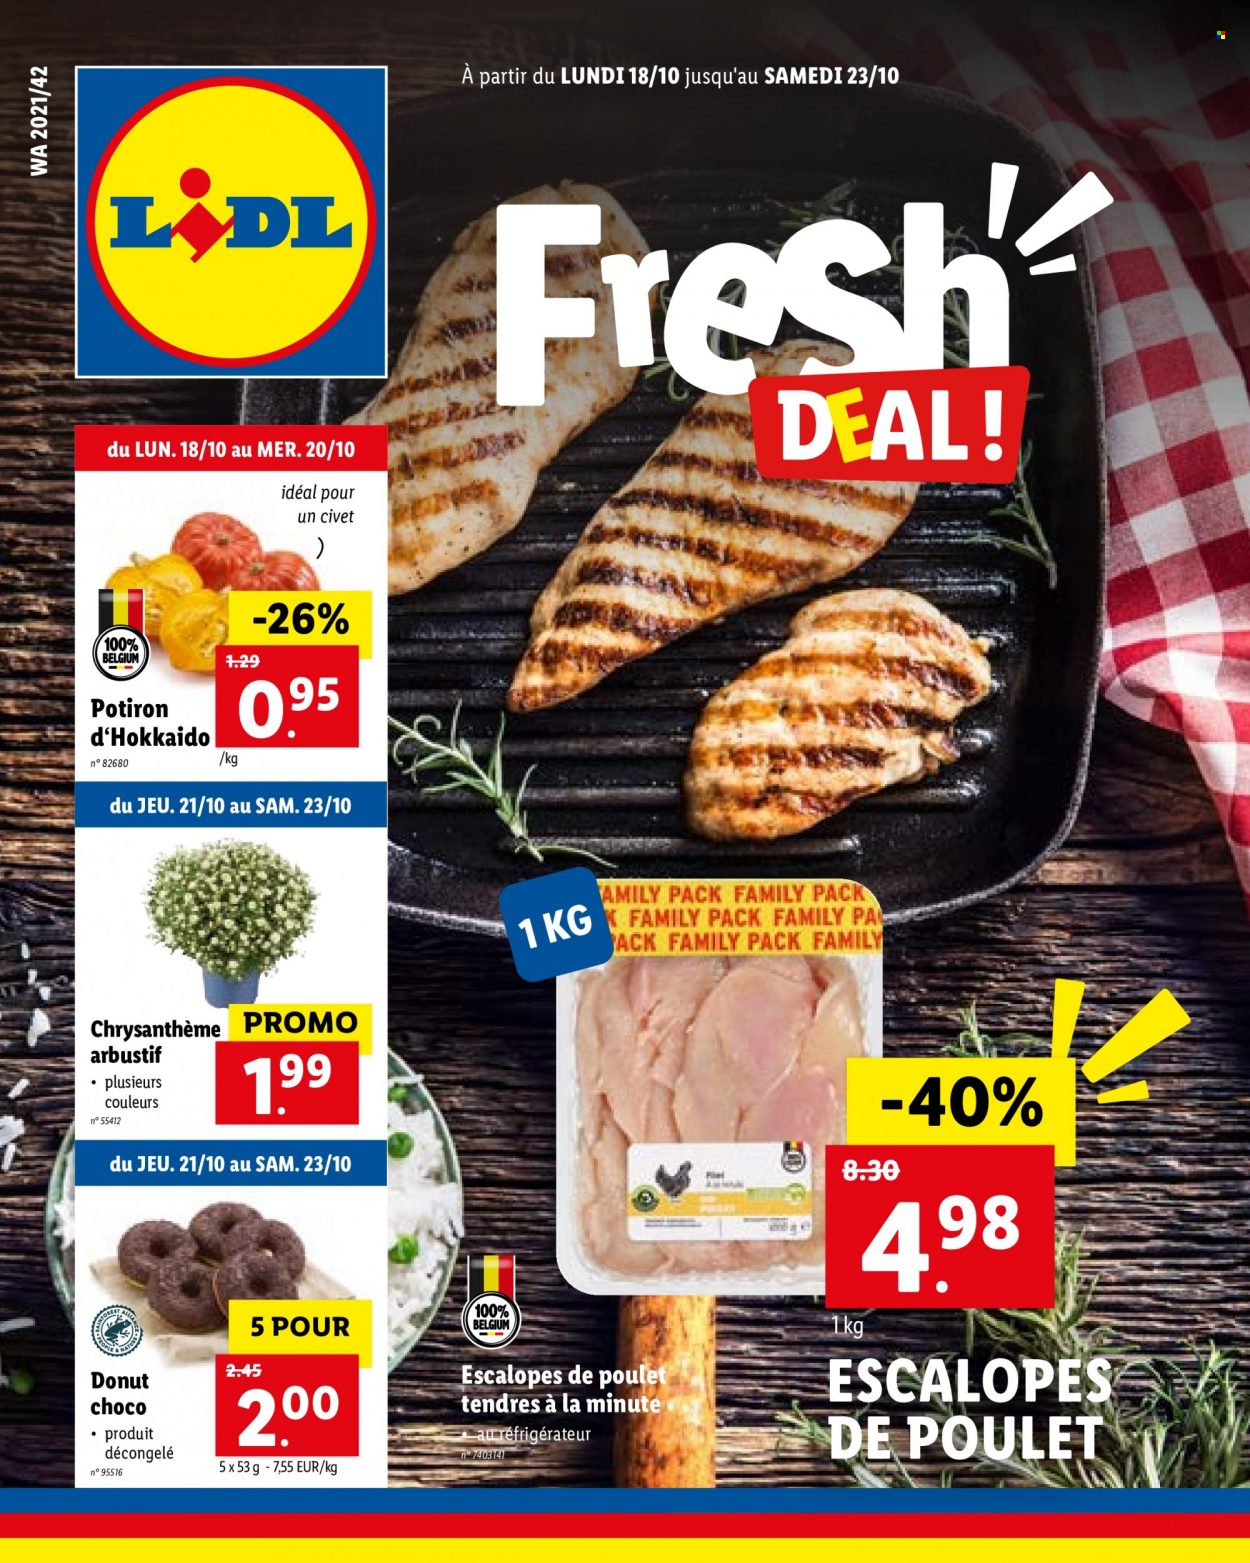 Catalogue Lidl - 18.10.2021 - 23.10.2021. Page 1.